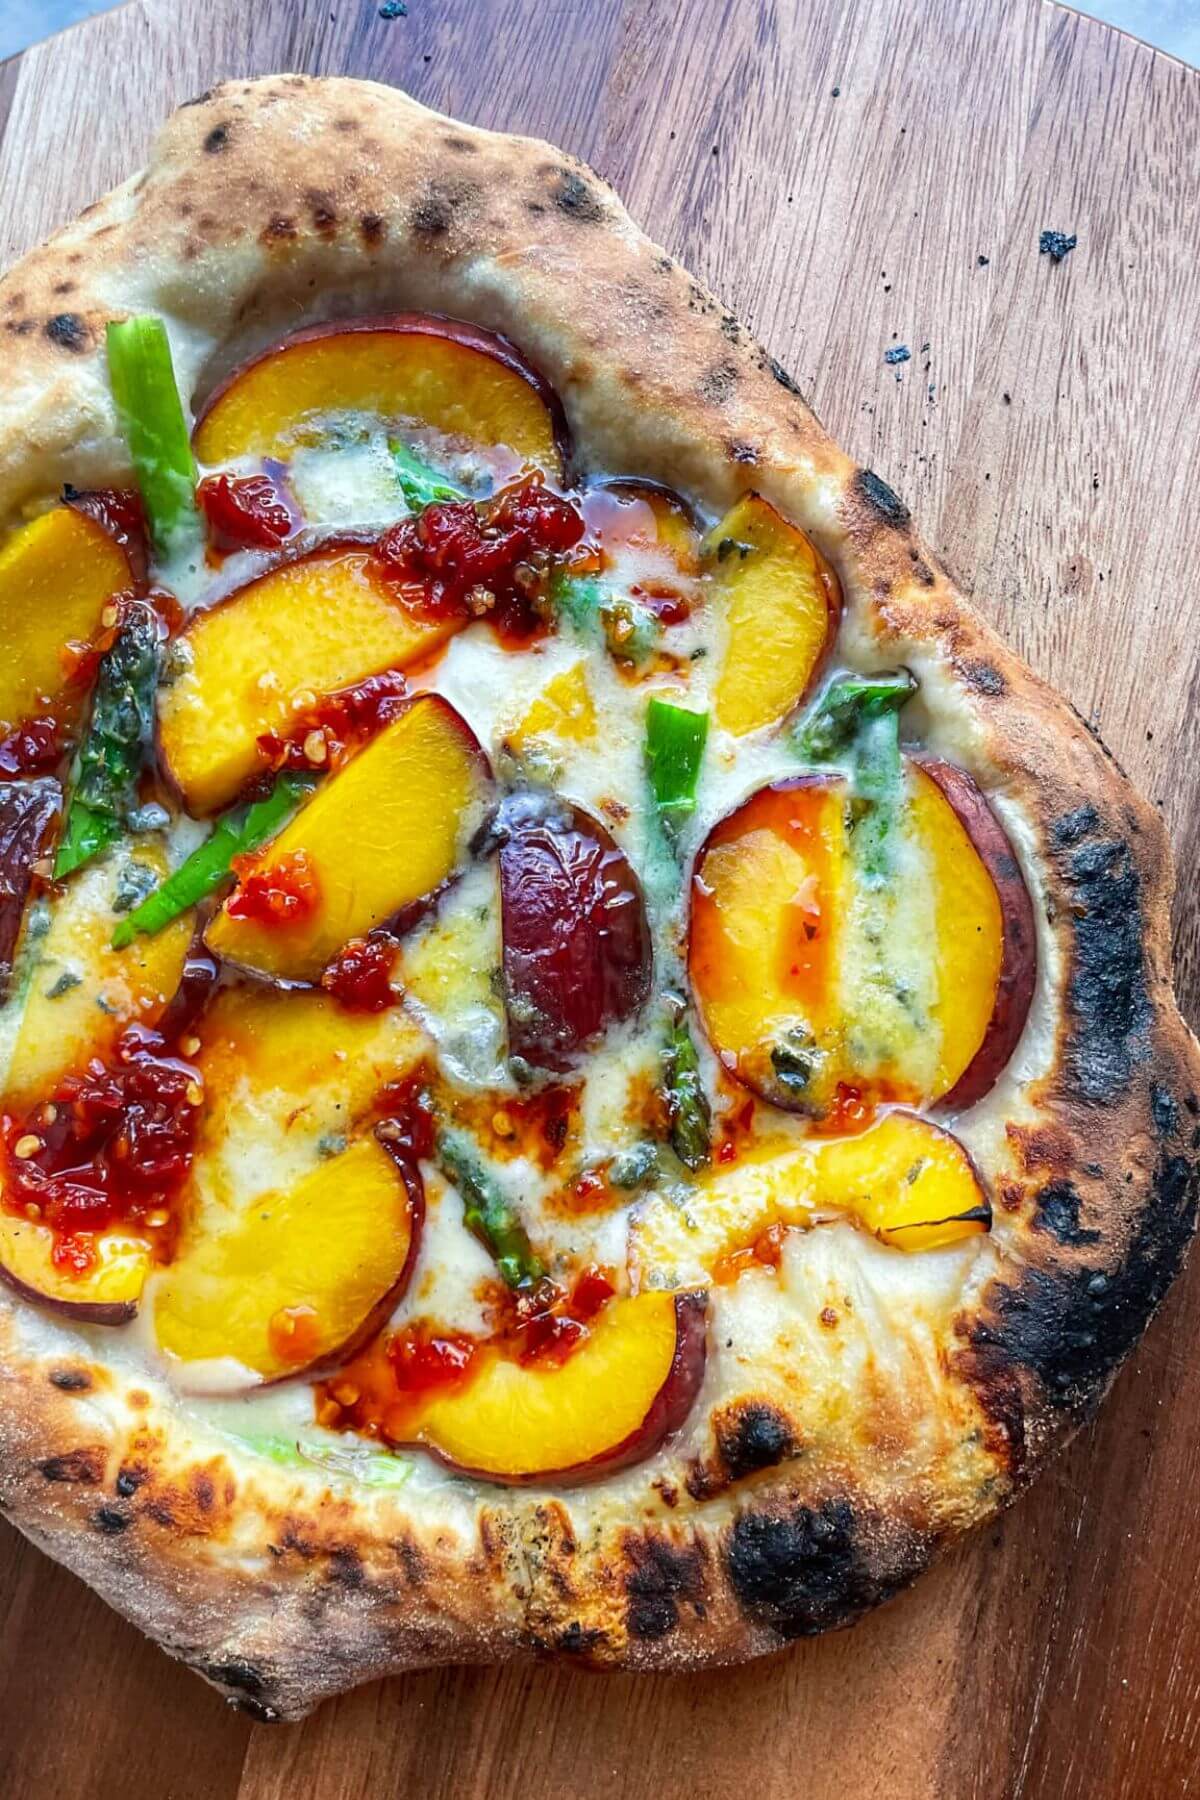 Peach, asparagus, blue cheese pizza with chilli jam drizzle on a wooden board.